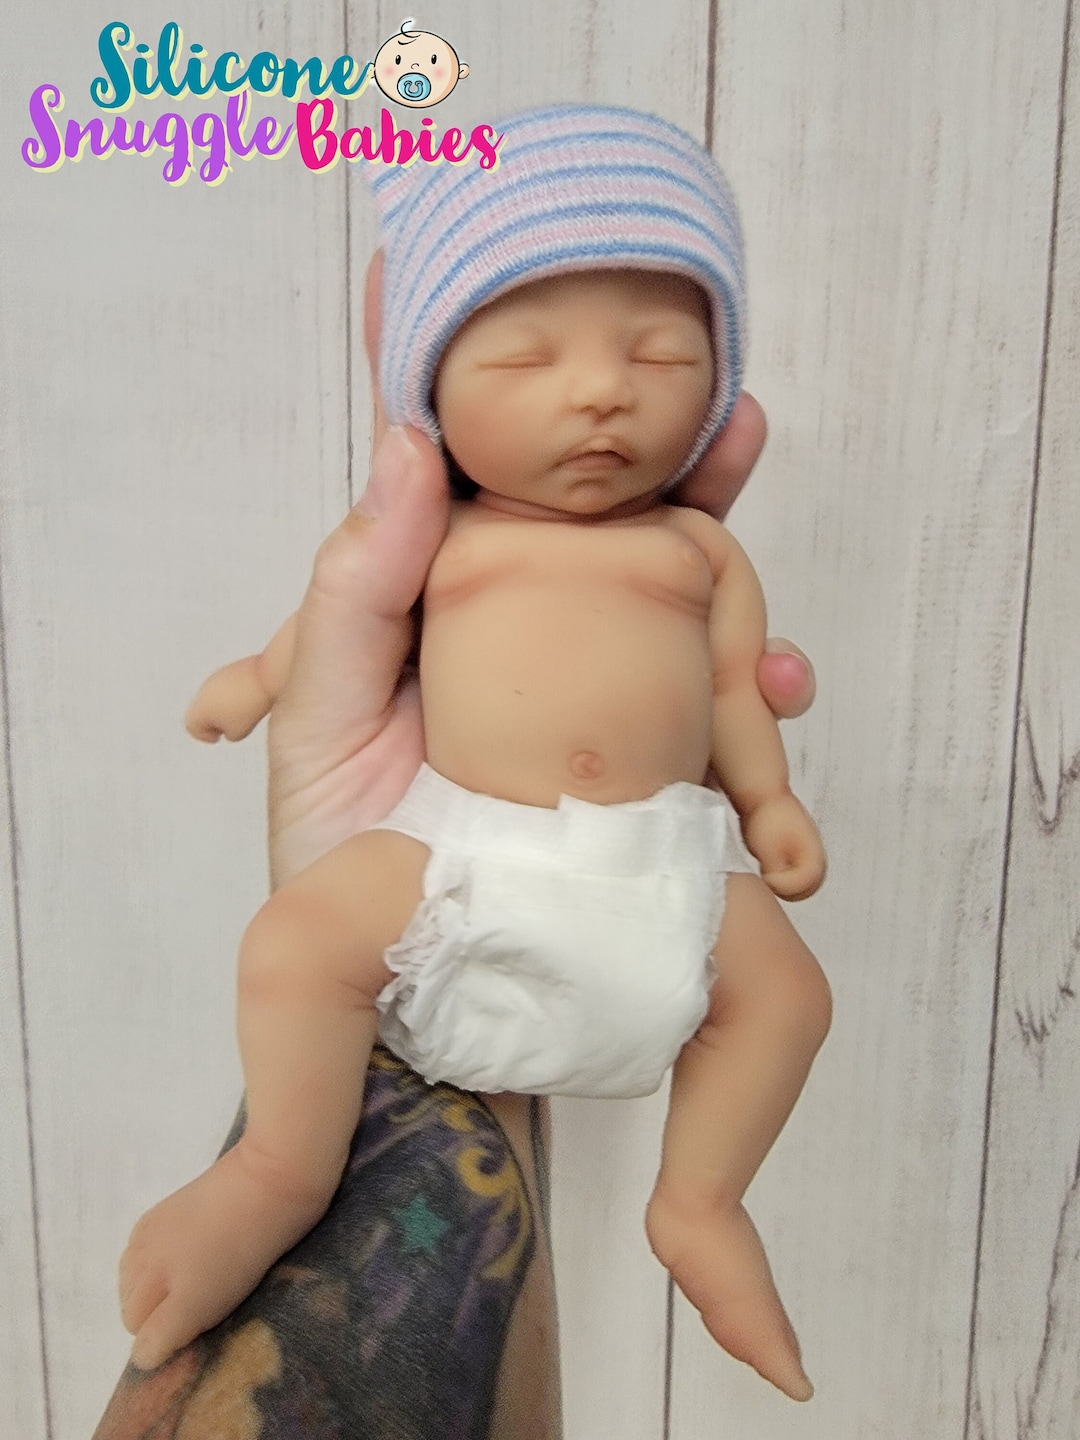 The Micro Collection - 8 Lifelike Black and Ethnic Reborn Baby